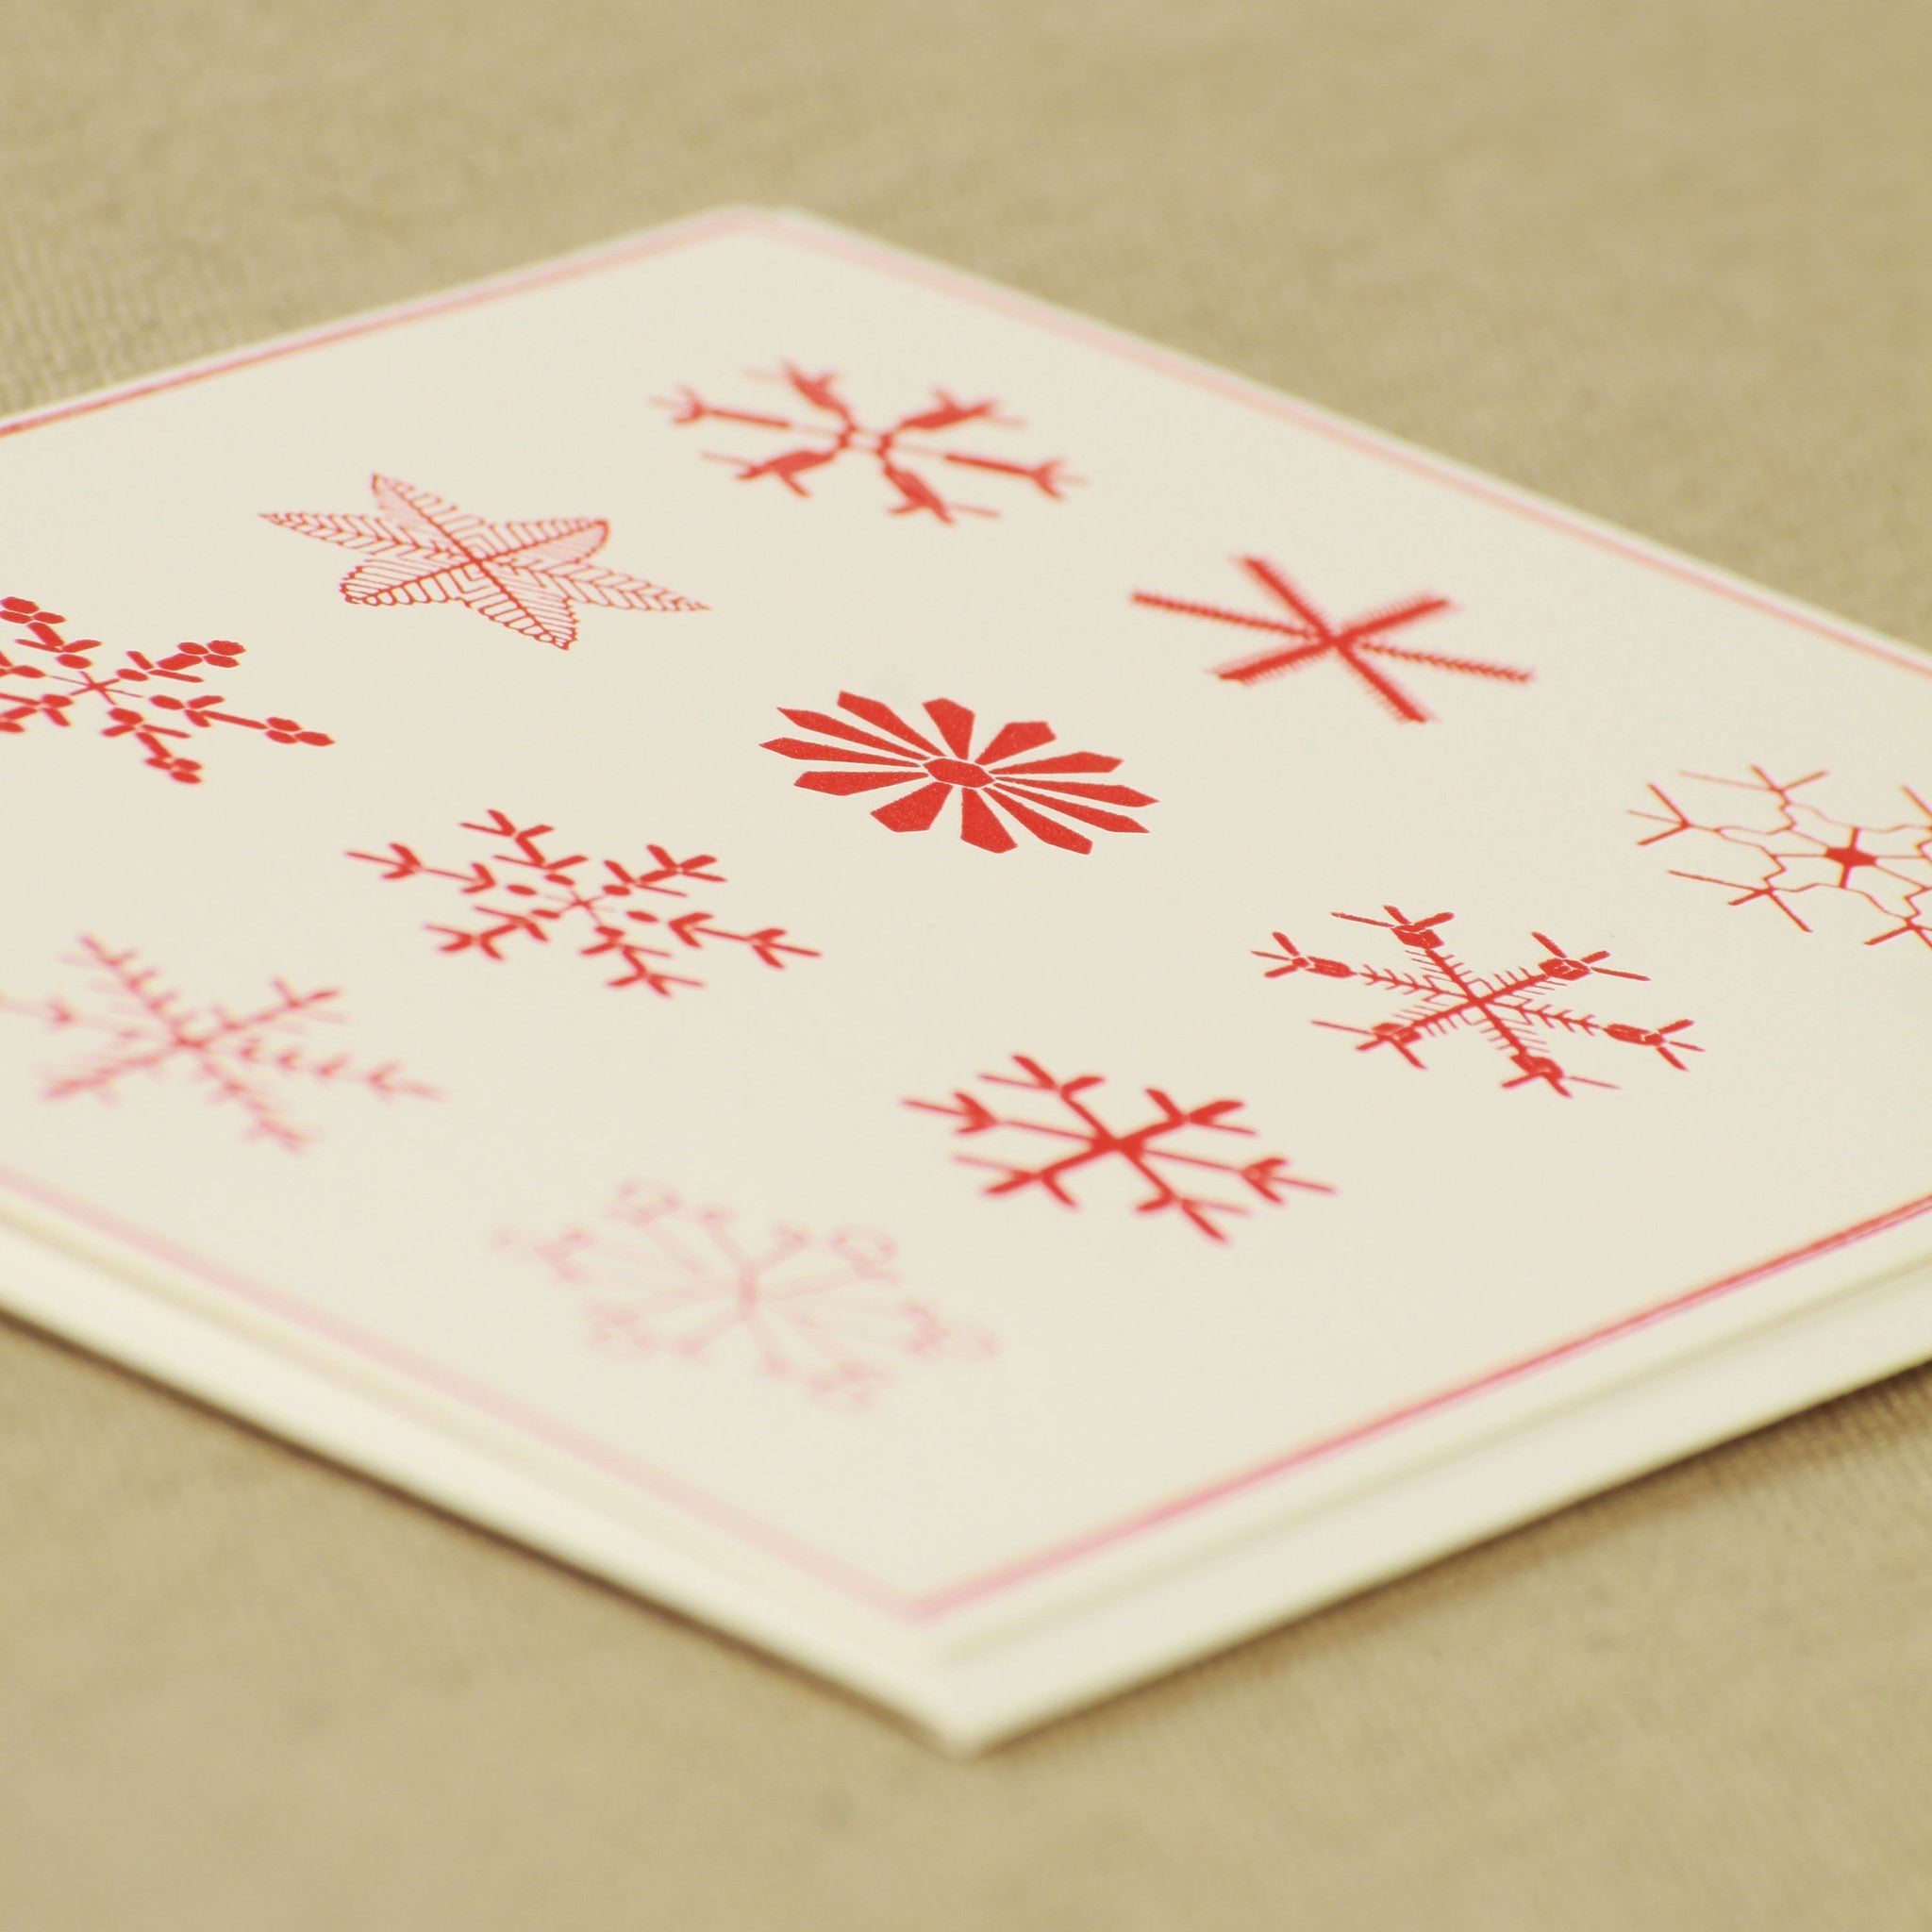 Early Snowflake Drawing #2